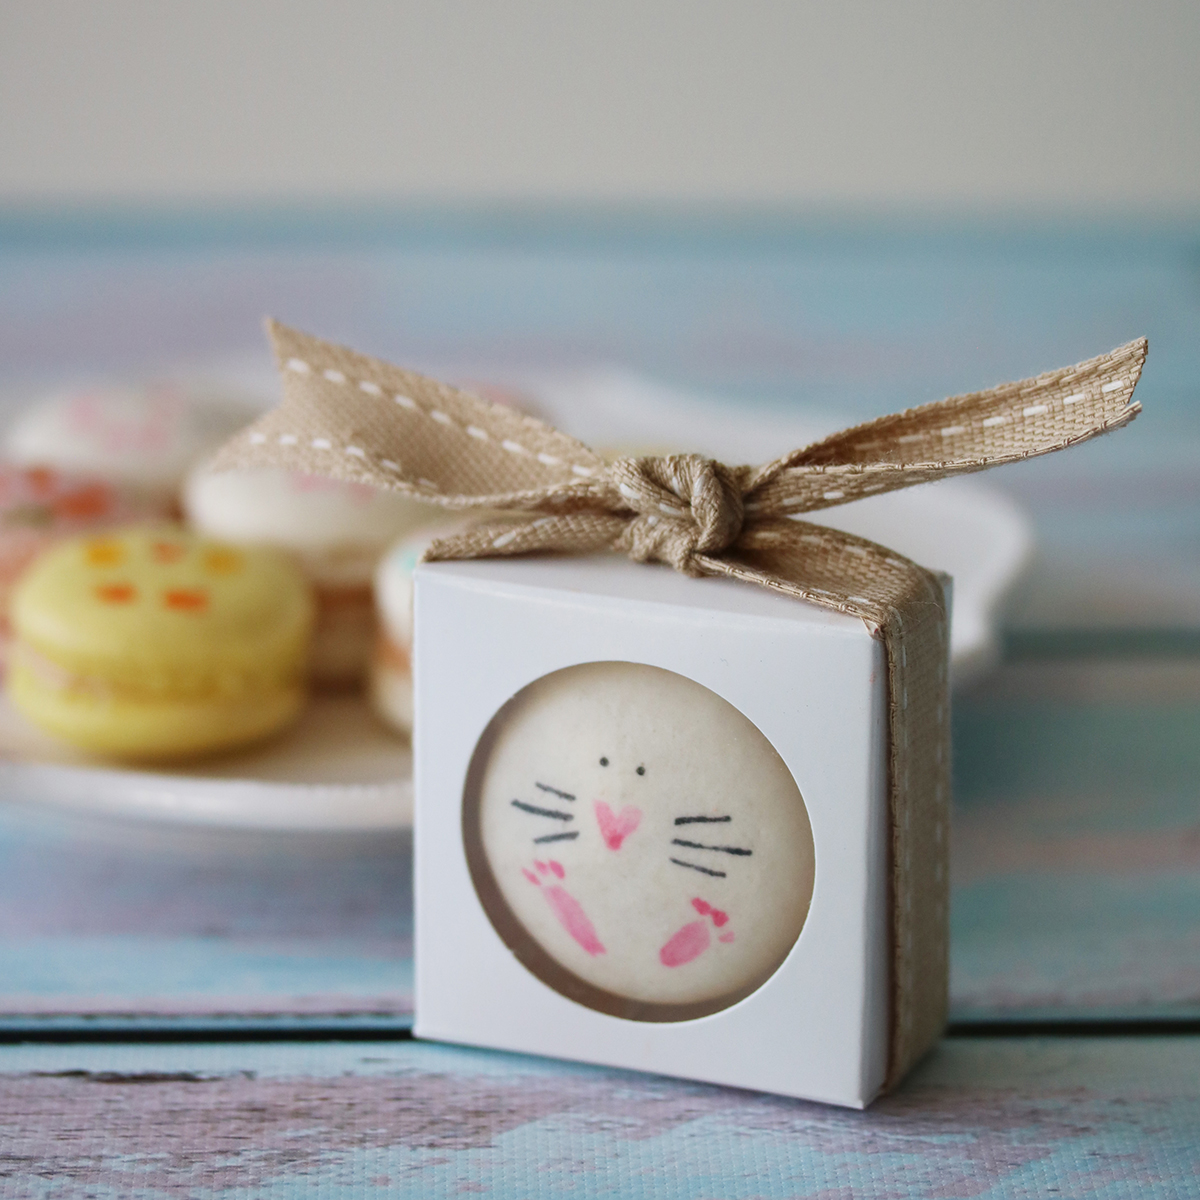 diy sweet ideas for entertaining and favors - painted macarons | Lorrie Everitt Studio